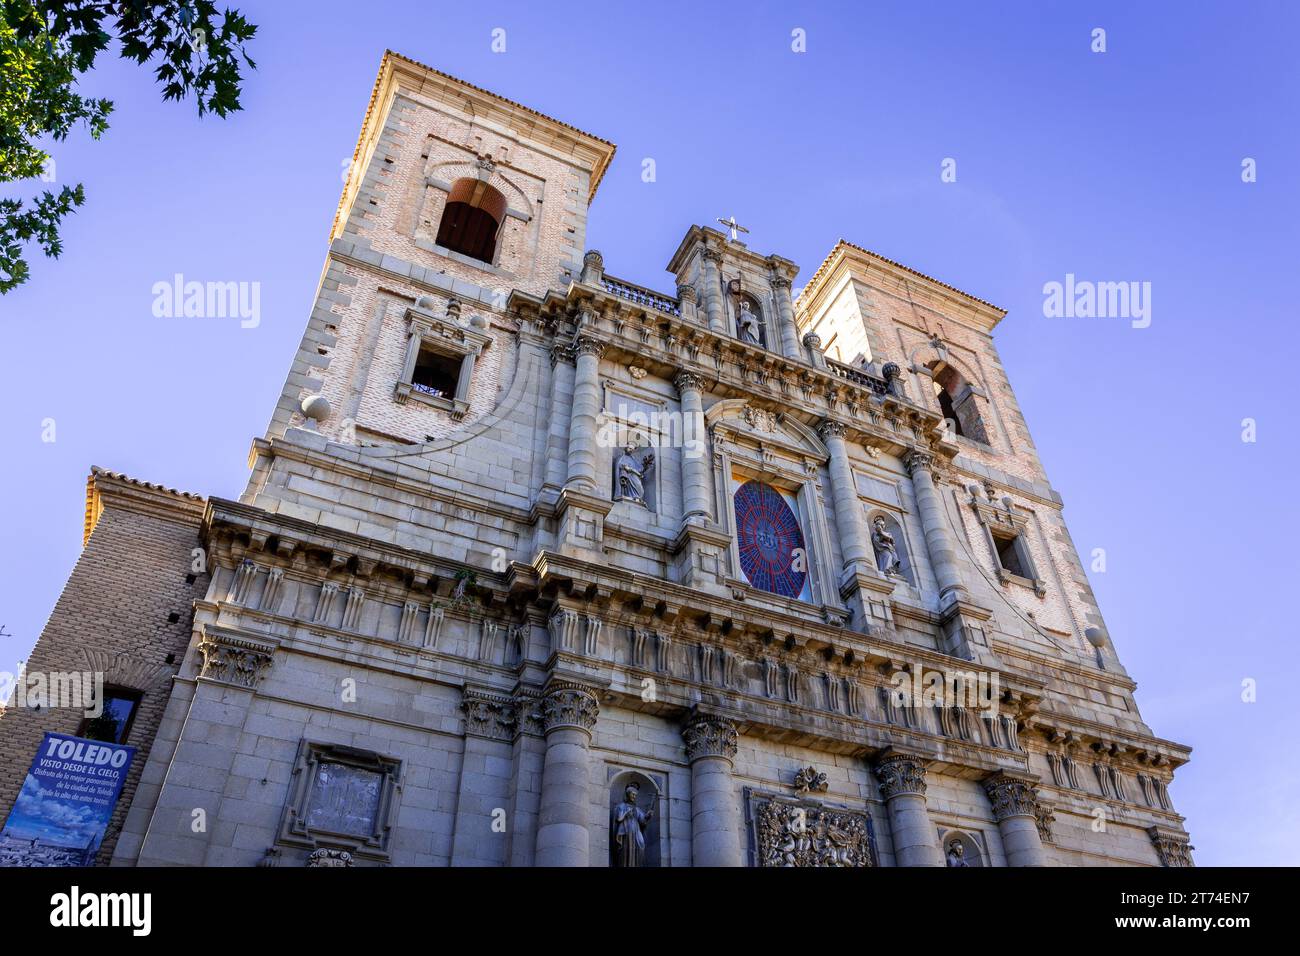 Toledo, Spain, 08.10.21. Church of San Ildefonso (Jesuit church), baroque style building with richly decorated facade with reliefs. Stock Photo